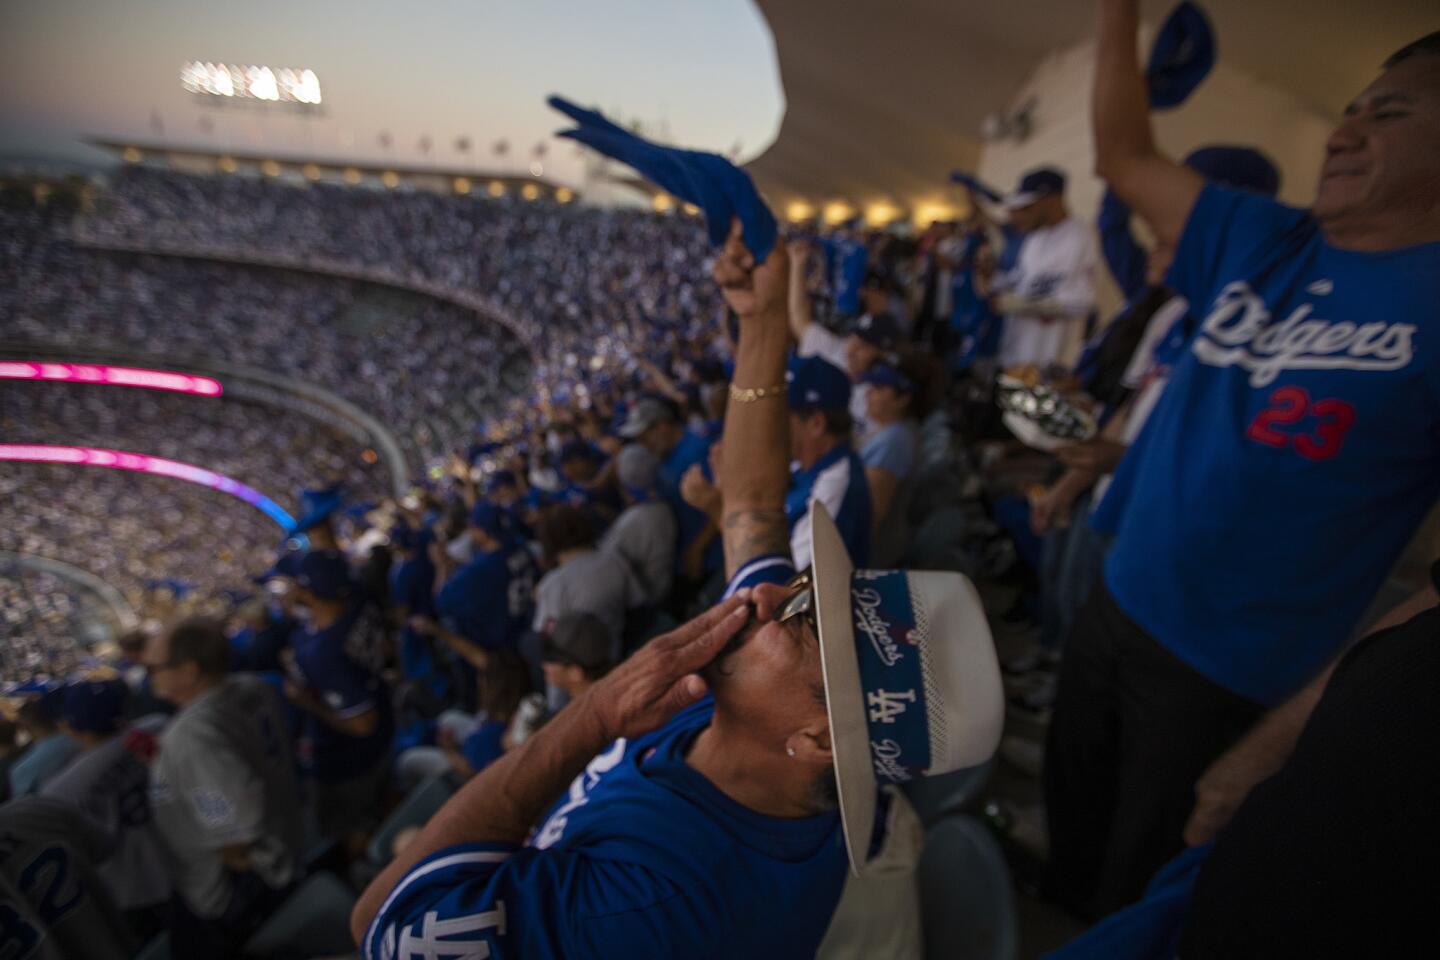 Dodgers fan Jesus Rubio II, center, and his son, Jesus Rubio III, of Lytle Creek, (not visible) erupt with celebration as Dodgers outfielder Joc Pederson hits a home run in the third inning.